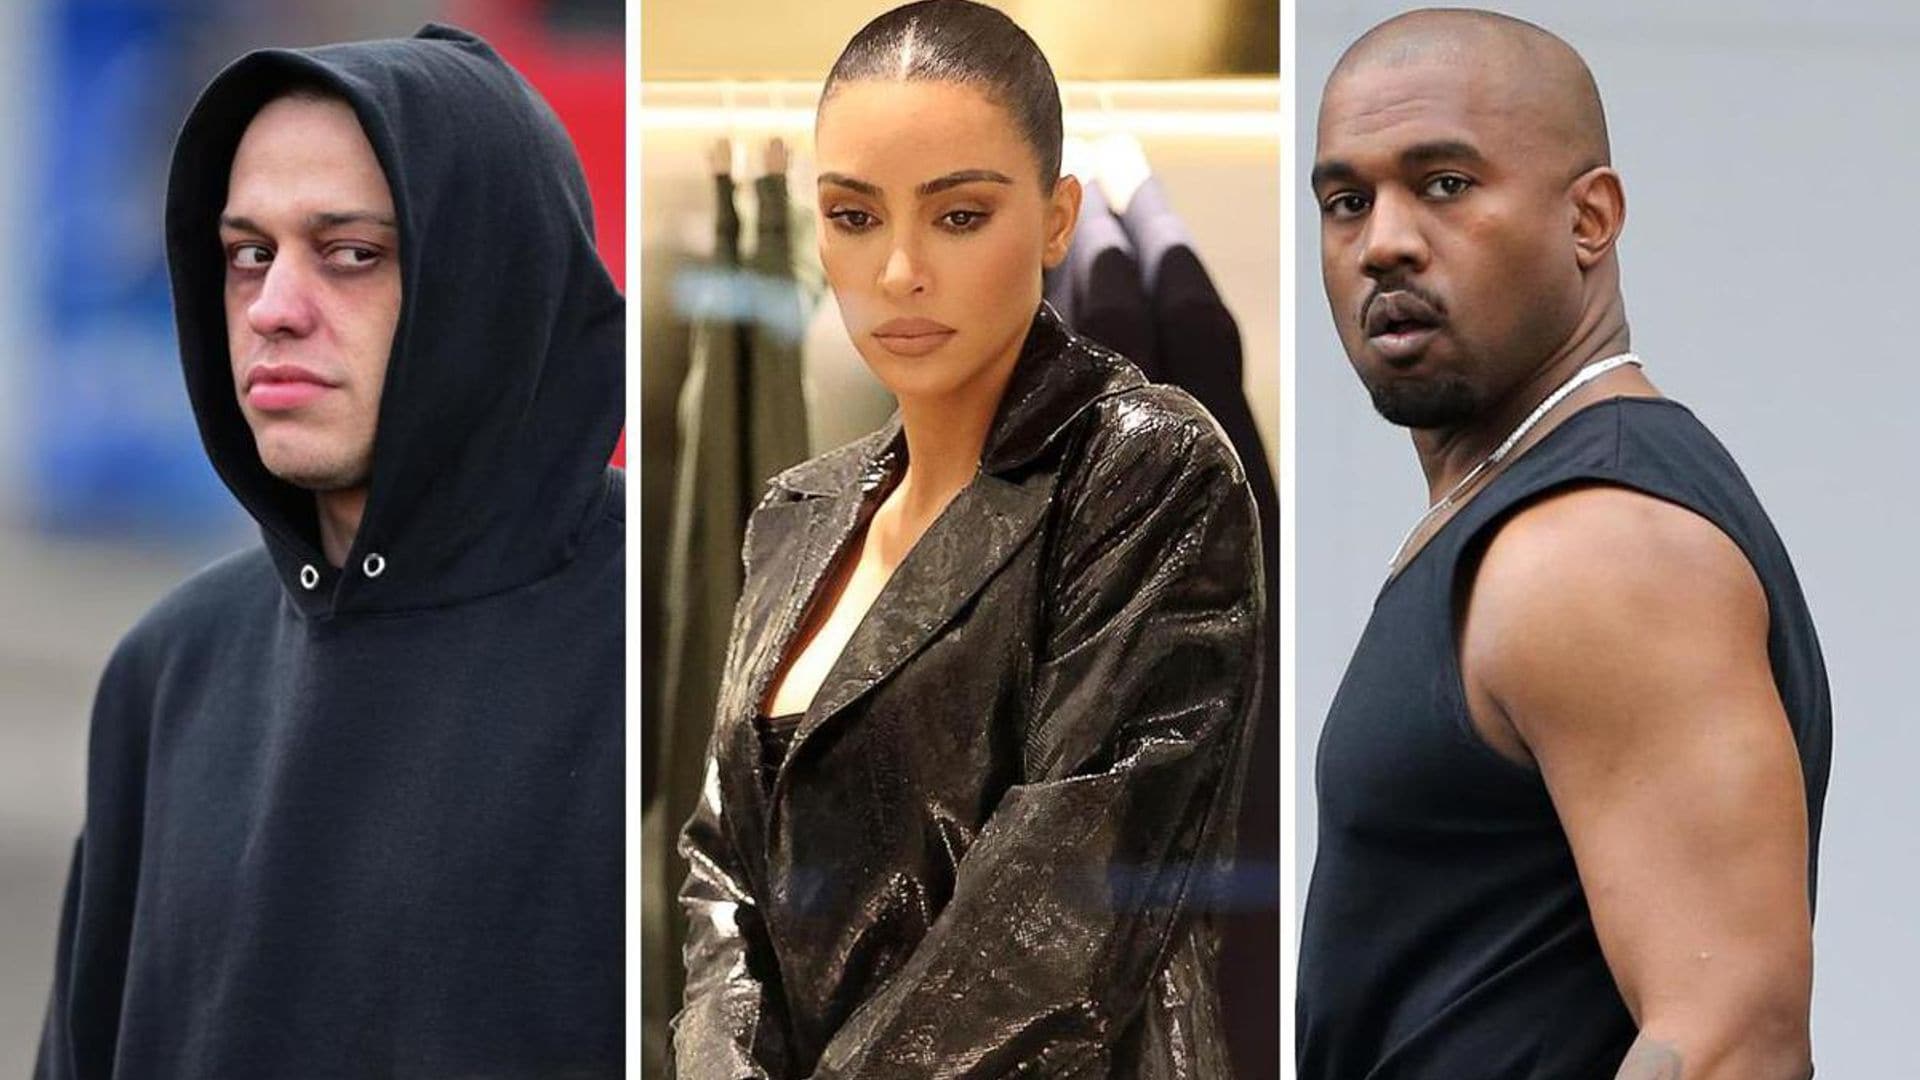 Kanye West claims co-parenting issues, Kim Kardashian responds and Pete Davidson is ‘done being quiet’